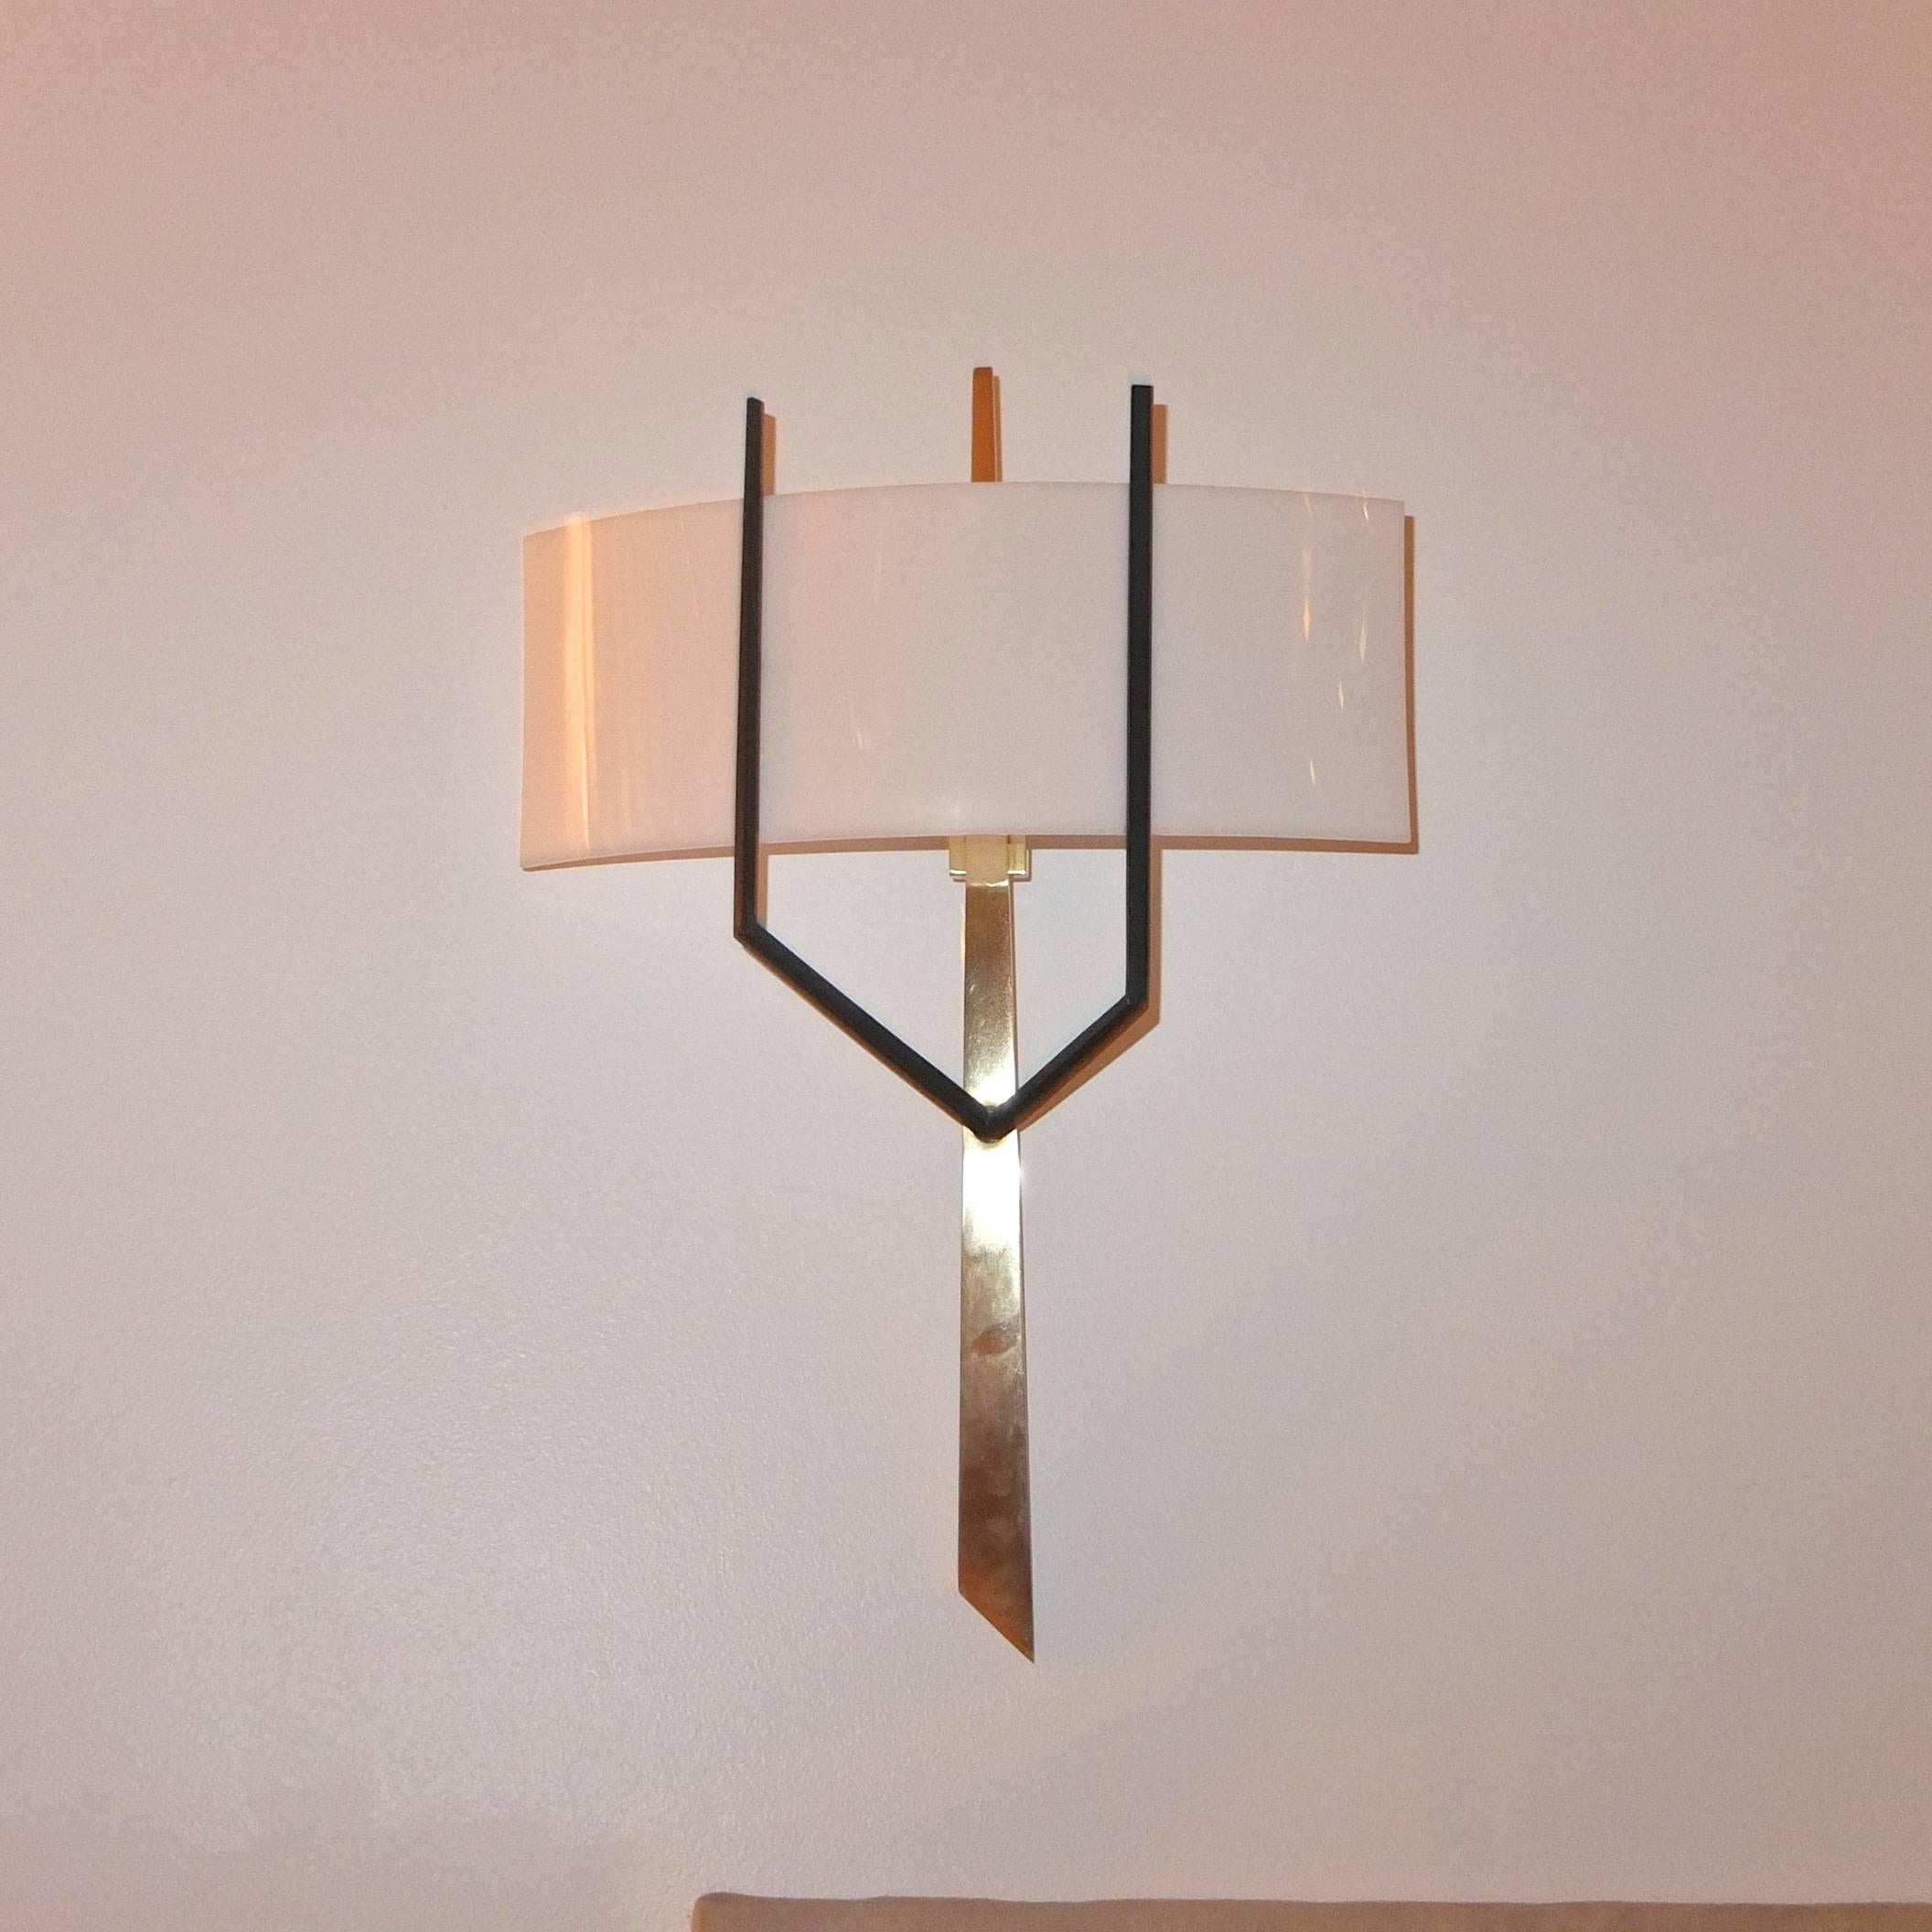 French 1950s wall-mounted lamp in the manner of Felix Agostini produced by Royal Lumiere for Maison Lunel. Organic form brass stalagmite with black oxidized forked arms supporting a curved opaque white plexiglass reflector. Two candelabra